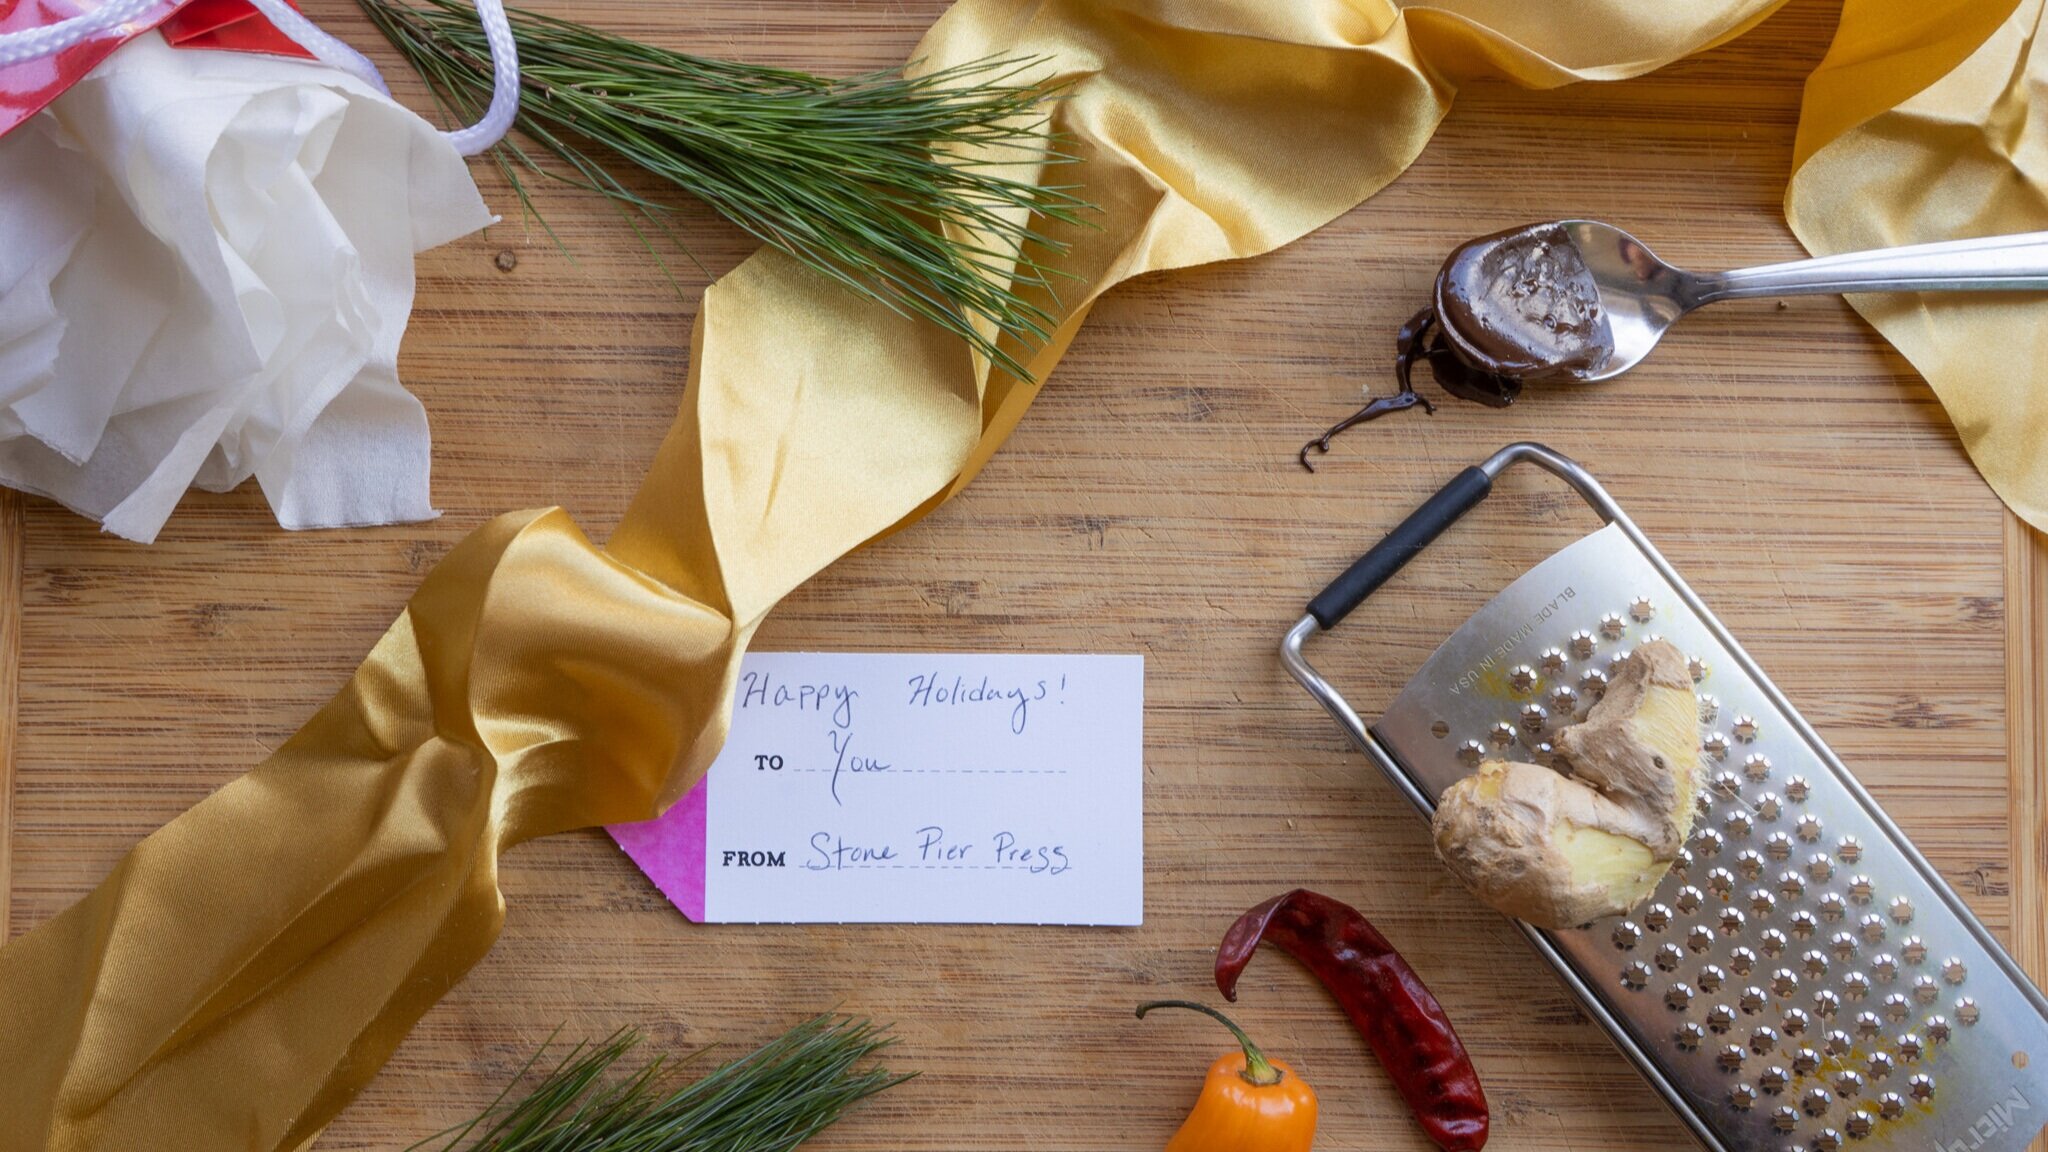 Seven climate-friendly, festive, and delicious holiday gift ideas14;from us, to you. (Photo: Emily Anderson)